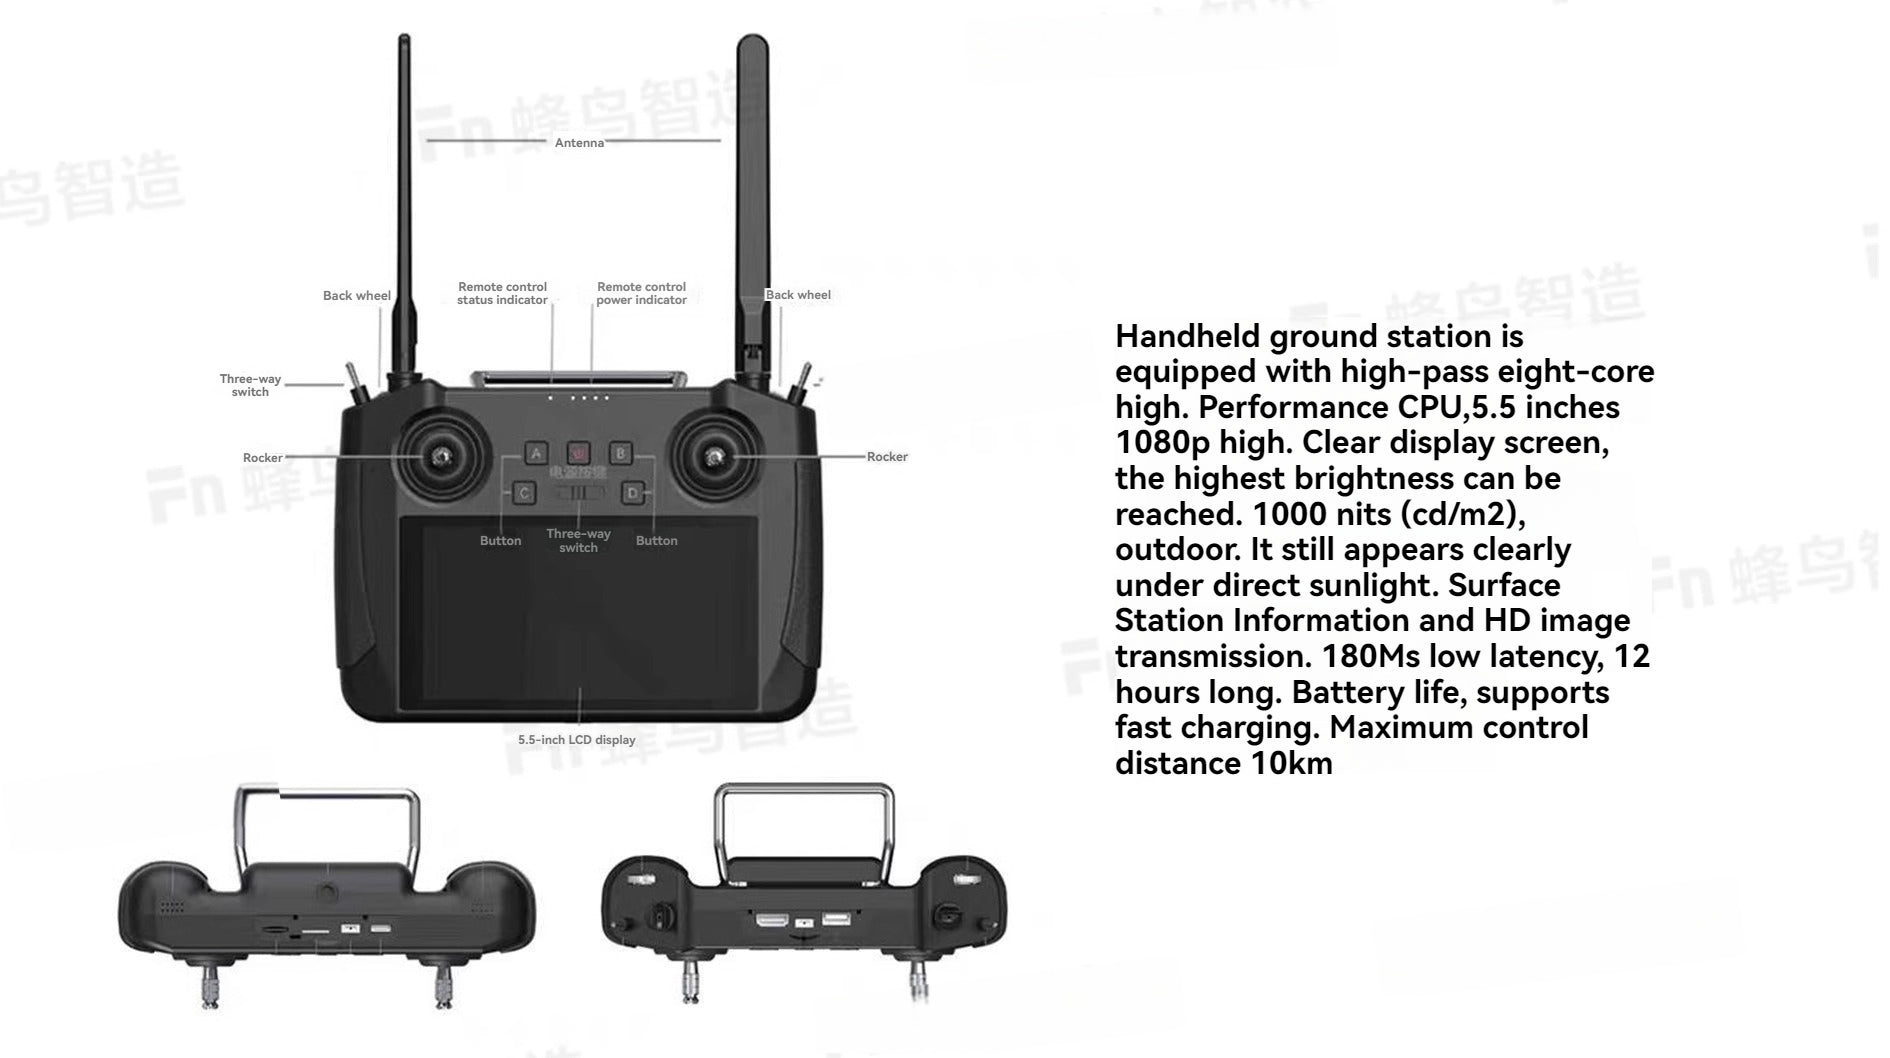 RCDrone, ground station is three-way equipped with high-pass eight-core switch high: Performance CPU